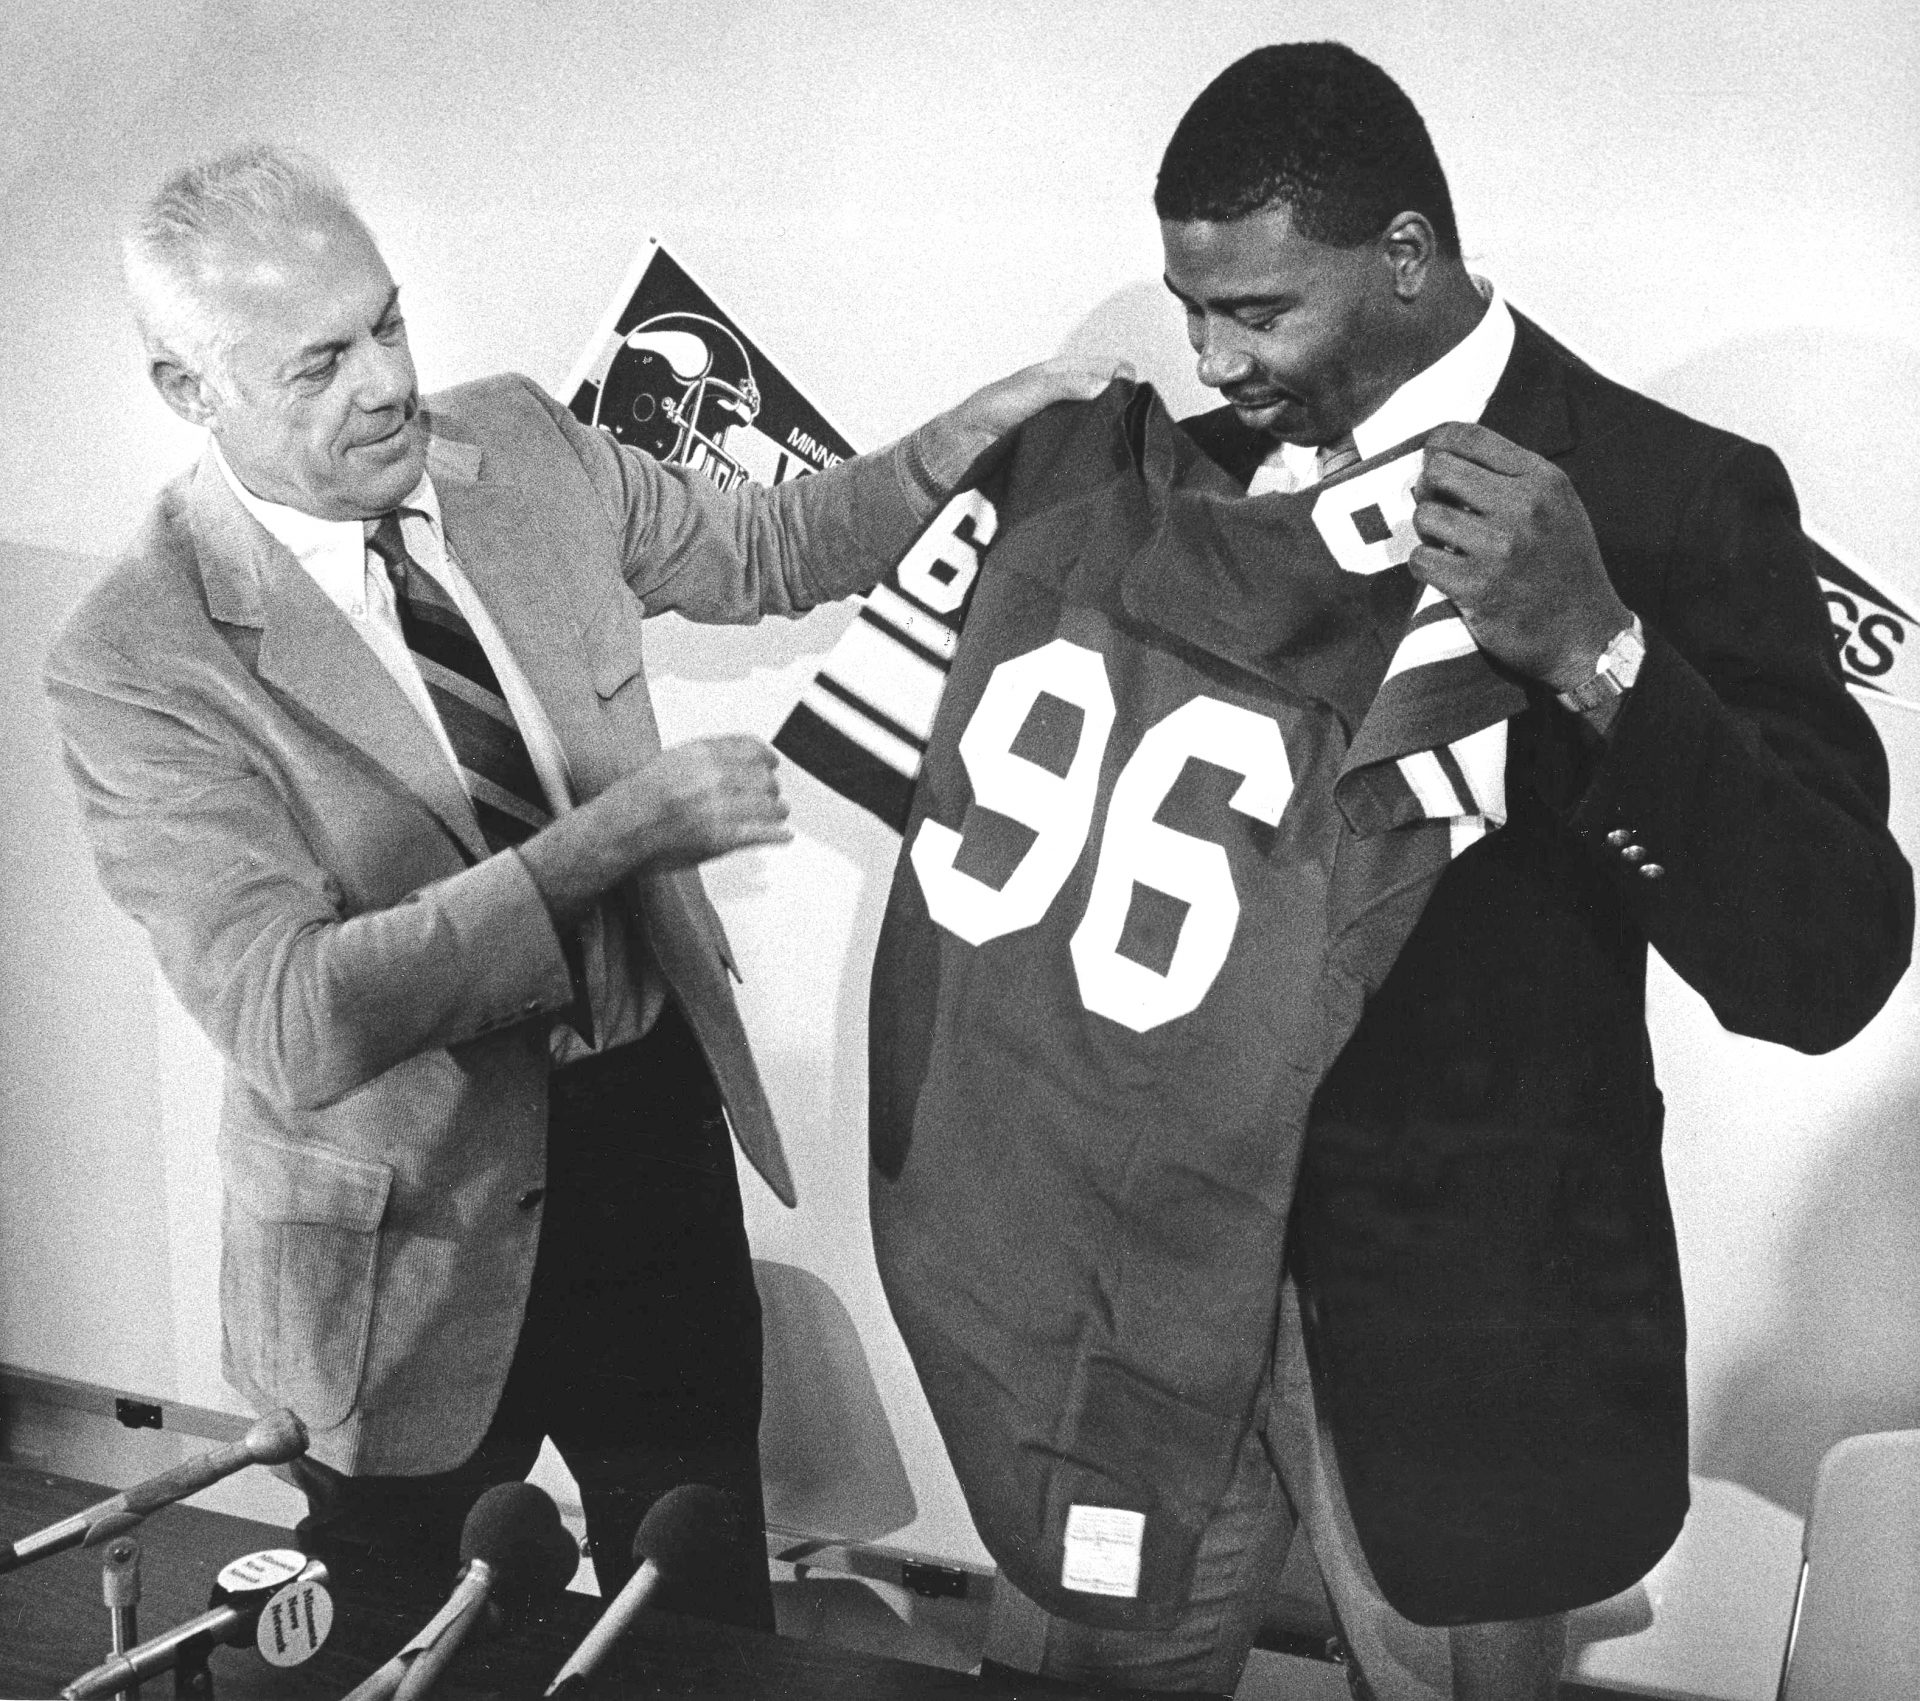 Minnesota Vikings head coach Bud Grant holds up the new jersey to their first-round draft pick Chris Doleman at a press conference to introduce the linebacker from Pittsburgh in Eden Prairie, Minn., May 1, 1985.